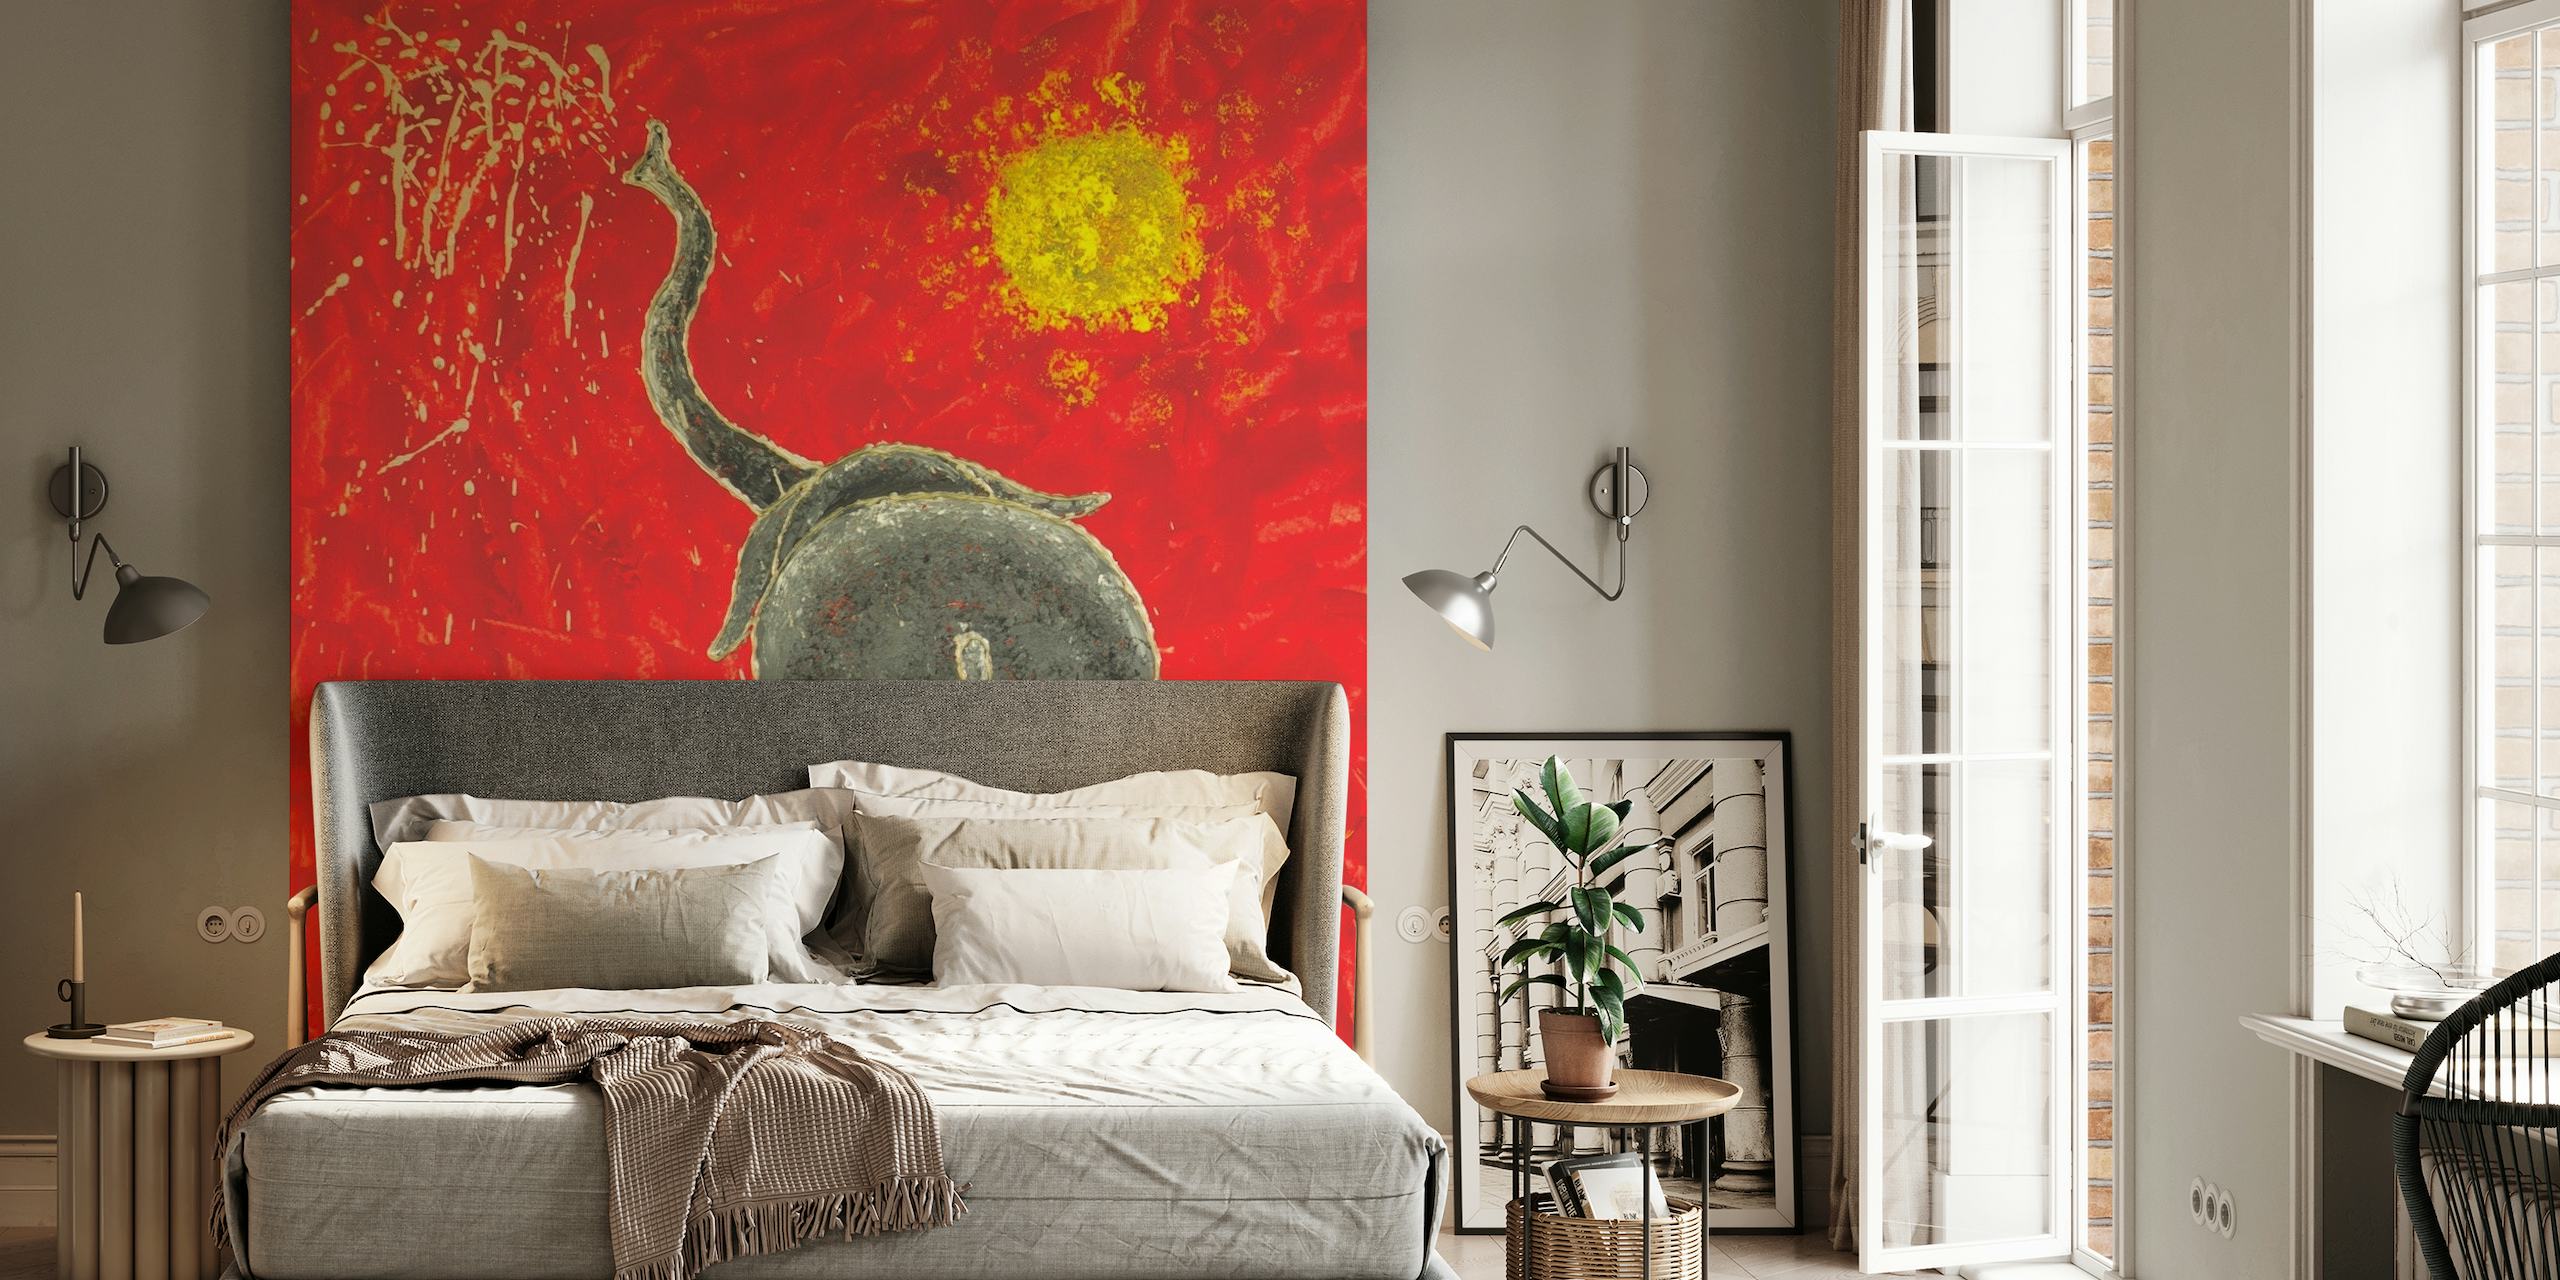 Artistic wall mural of a playful elephant in abstract style with a red background and yellow sun